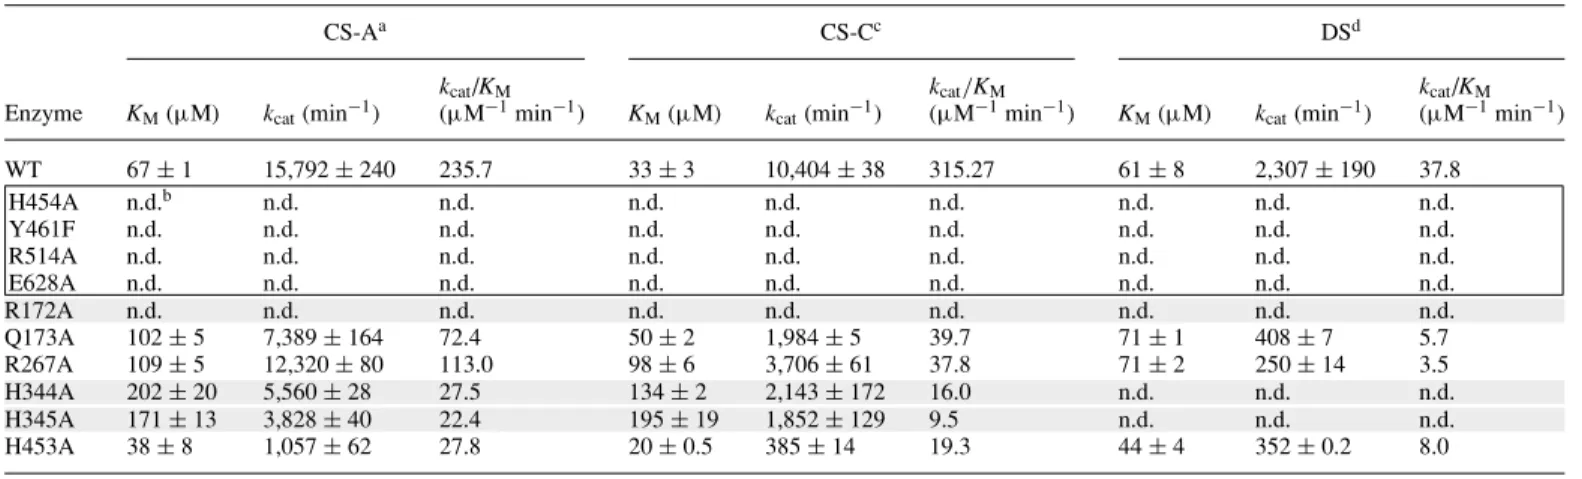 Table III. Kinetic analysis of BactnABC and its mutants. Mutants of the tetrad residues are boxed